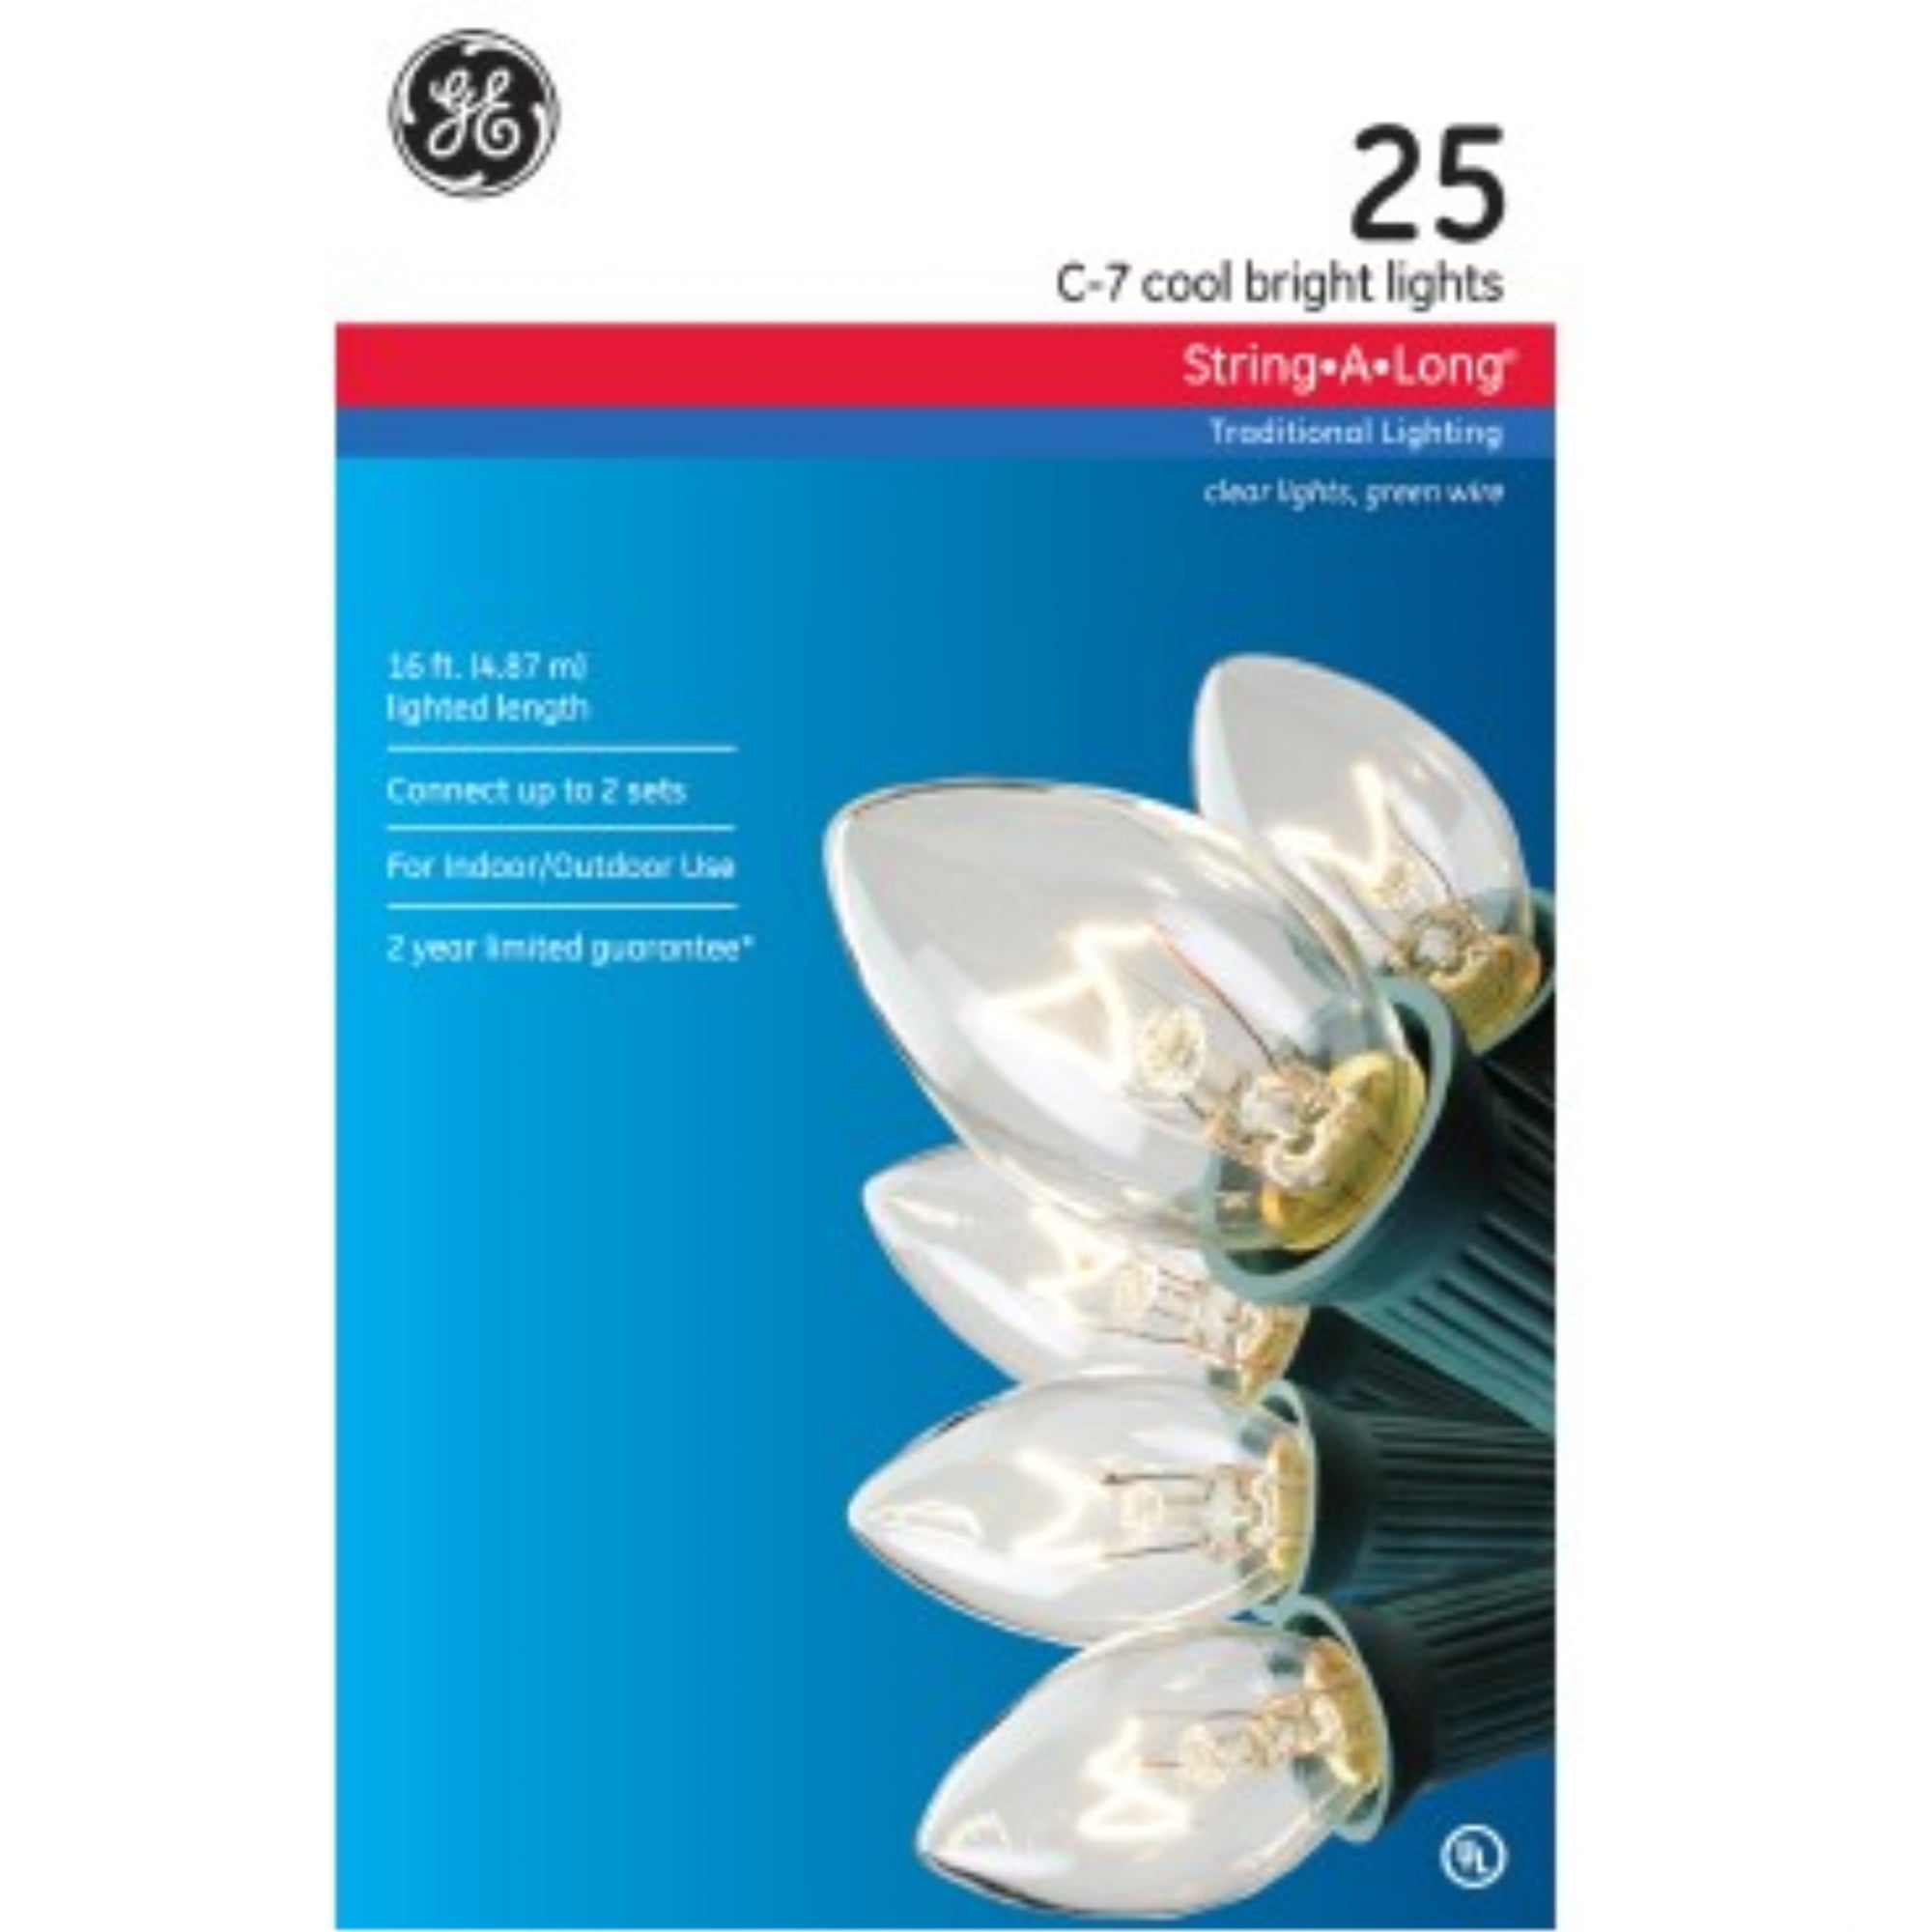 GE String-A-Long 25 Cool Bright C7 Light Set, Clear, 16 feet Lighted Length